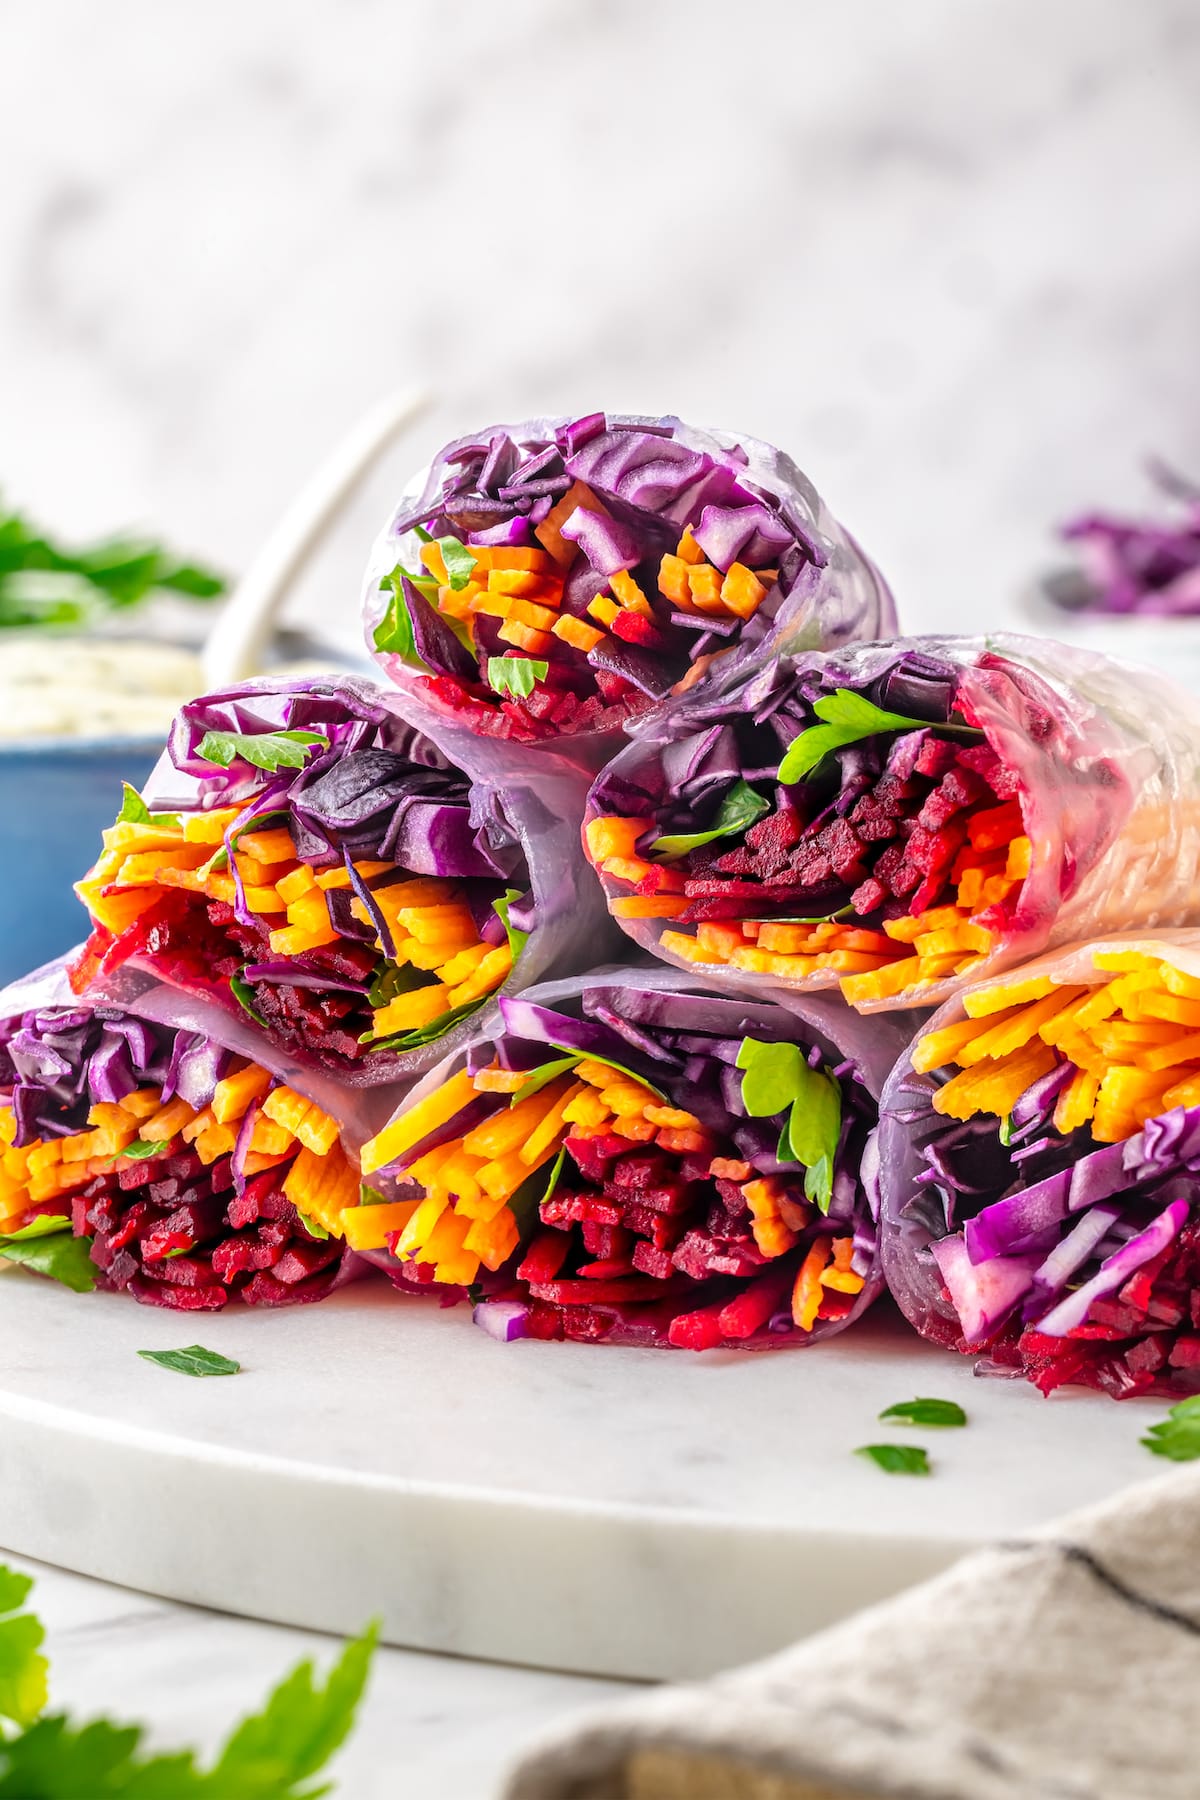 Summer Rolls with Dairy Free Dipping Sauce